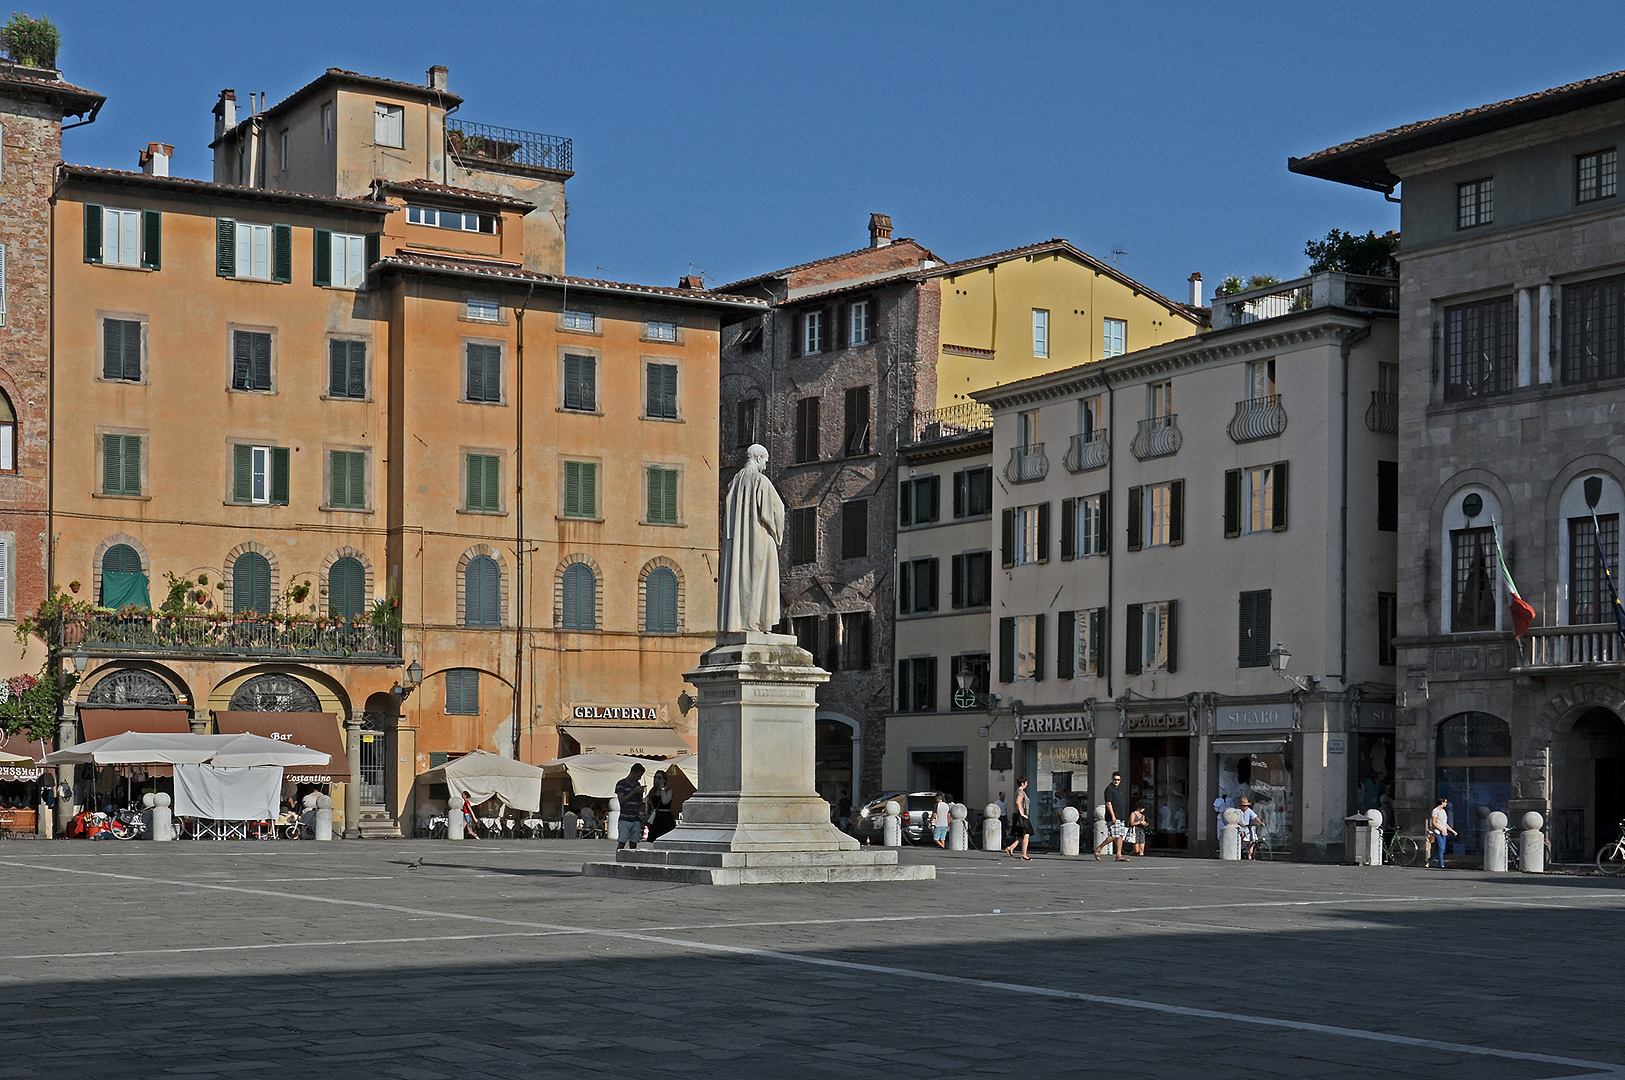 Piazza San Michele, Lucca, Toscane, Itali, Piazza San Michele, Lucca, Tuscany, Italy